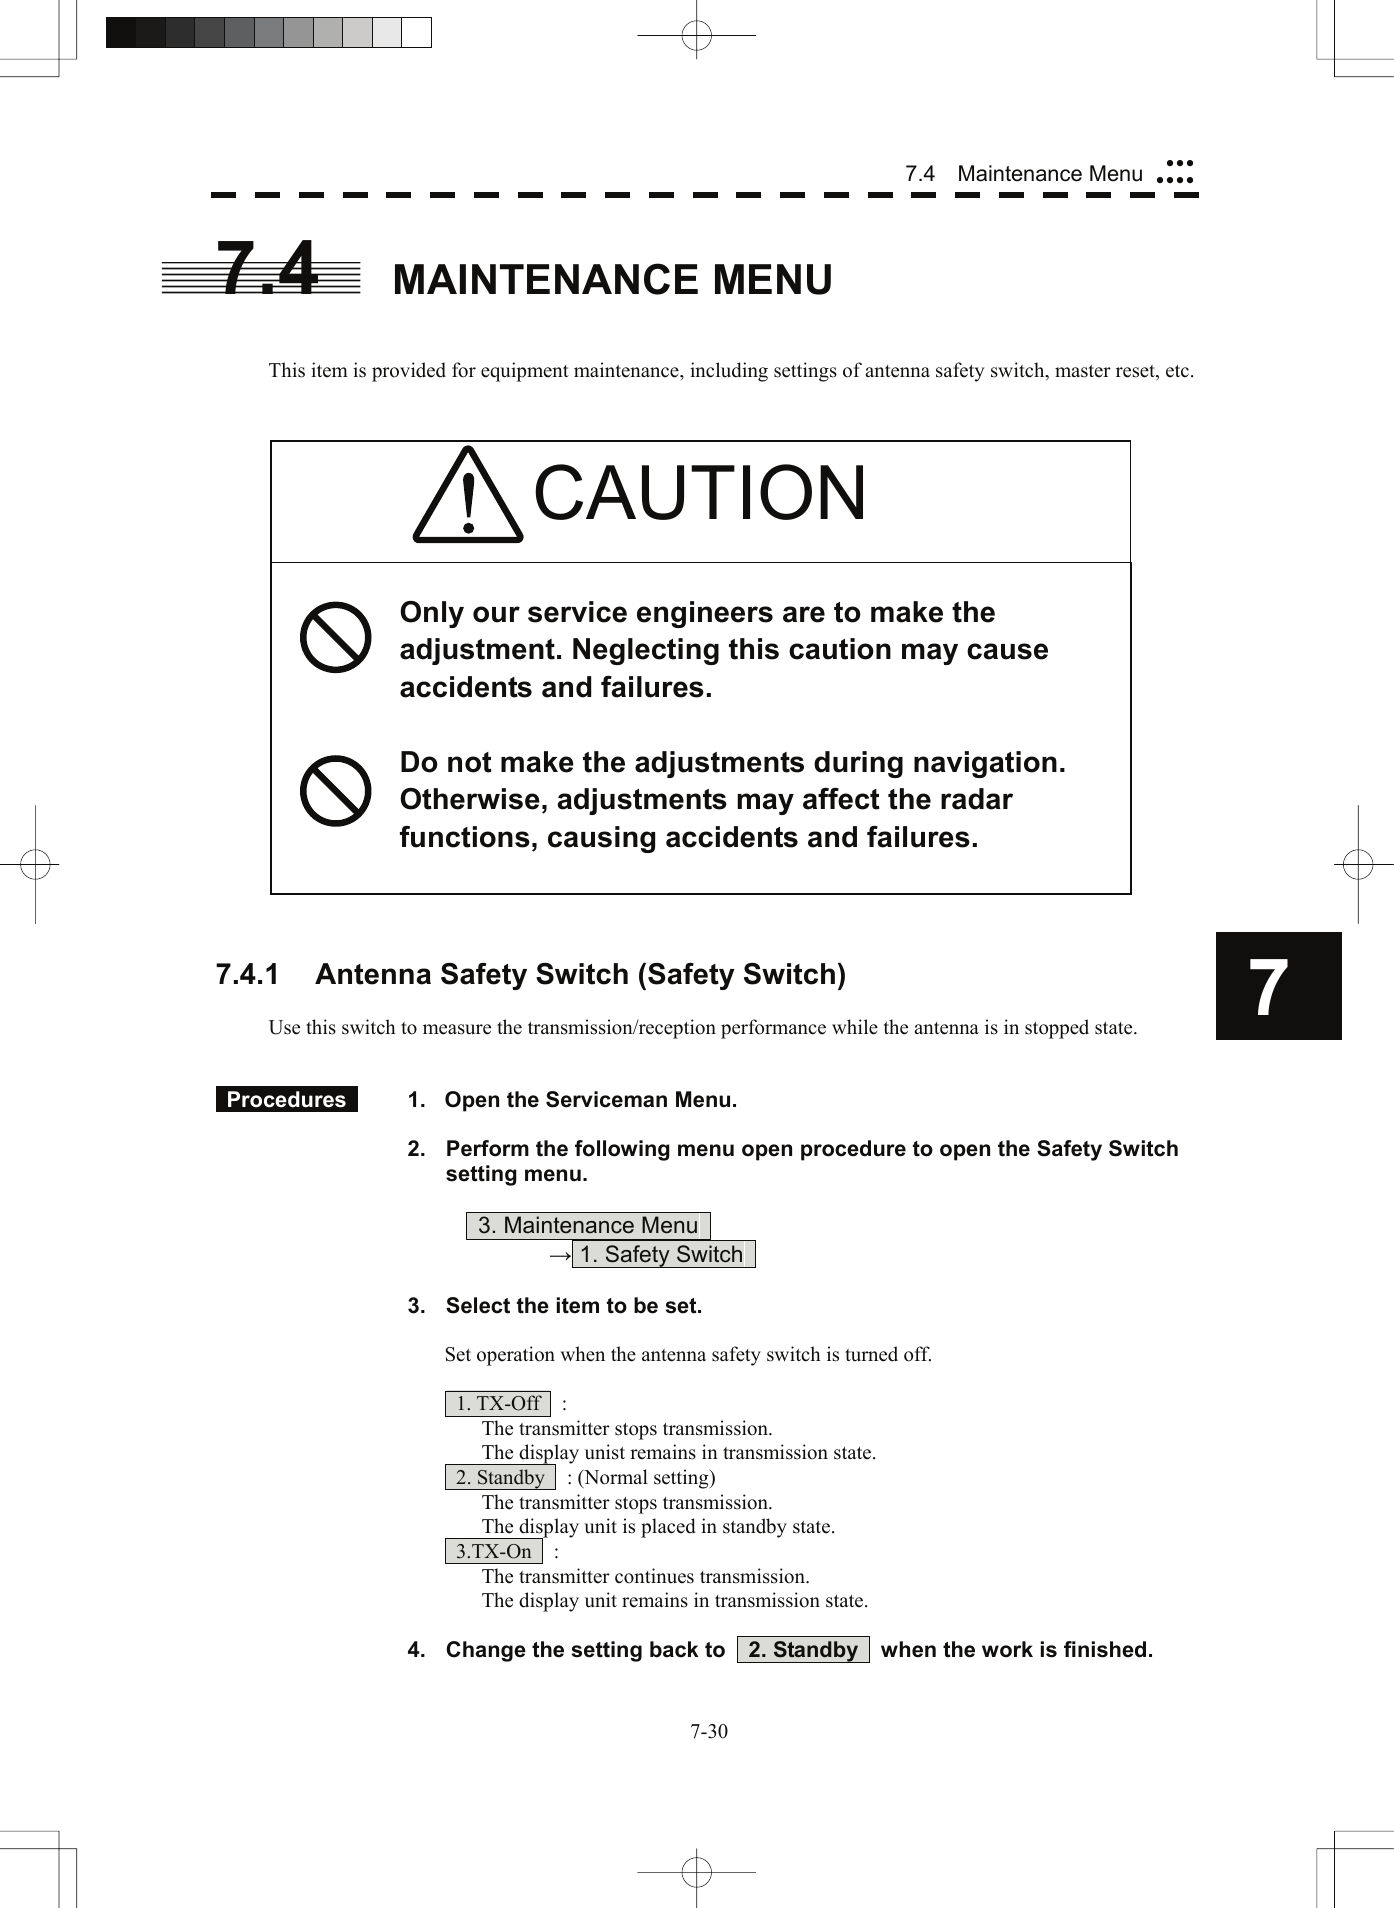  77.4  Maintenance Menu yyyyyyy7.4 MAINTENANCE MENU   This item is provided for equipment maintenance, including settings of antenna safety switch, master reset, etc.    CAUTION  Only our service engineers are to make the adjustment. Neglecting this caution may cause accidents and failures.  Do not make the adjustments during navigation. Otherwise, adjustments may affect the radar functions, causing accidents and failures.                      7.4.1  Antenna Safety Switch (Safety Switch)  Use this switch to measure the transmission/reception performance while the antenna is in stopped state.    Procedures    1.  Open the Serviceman Menu.  2.  Perform the following menu open procedure to open the Safety Switch setting menu.          3. Maintenance Menu       → 1. Safety Switch    3.  Select the item to be set.  Set operation when the antenna safety switch is turned off.   1. TX-Off  :   The transmitter stops transmission.   The display unist remains in transmission state.   2. Standby    : (Normal setting)   The transmitter stops transmission.   The display unit is placed in standby state.  3.TX-On  :   The transmitter continues transmission.   The display unit remains in transmission state.  4.  Change the setting back to    2. Standby    when the work is finished. 7-30 